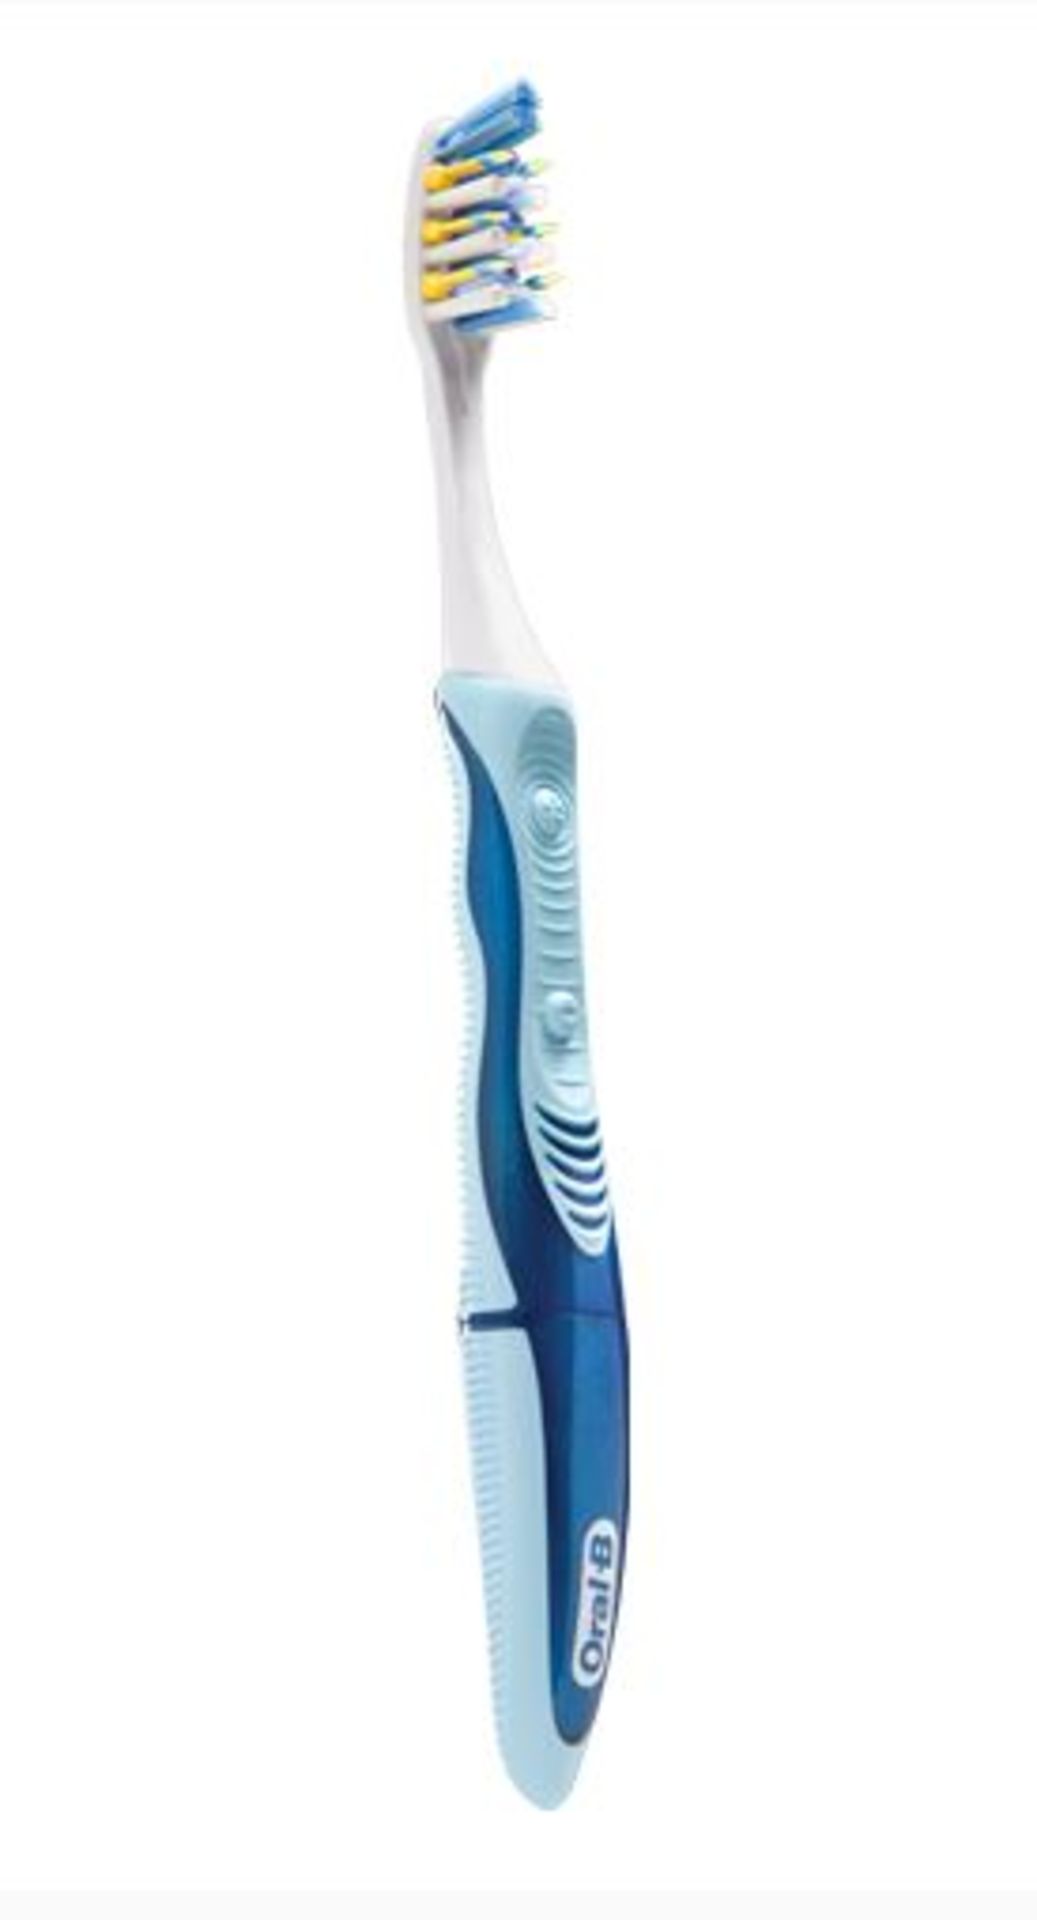 V Brand New Box of 12 Oral-B Electric Pulsar Pro Expert Toothbrushes - Online Price £75.00 ( - Image 2 of 2